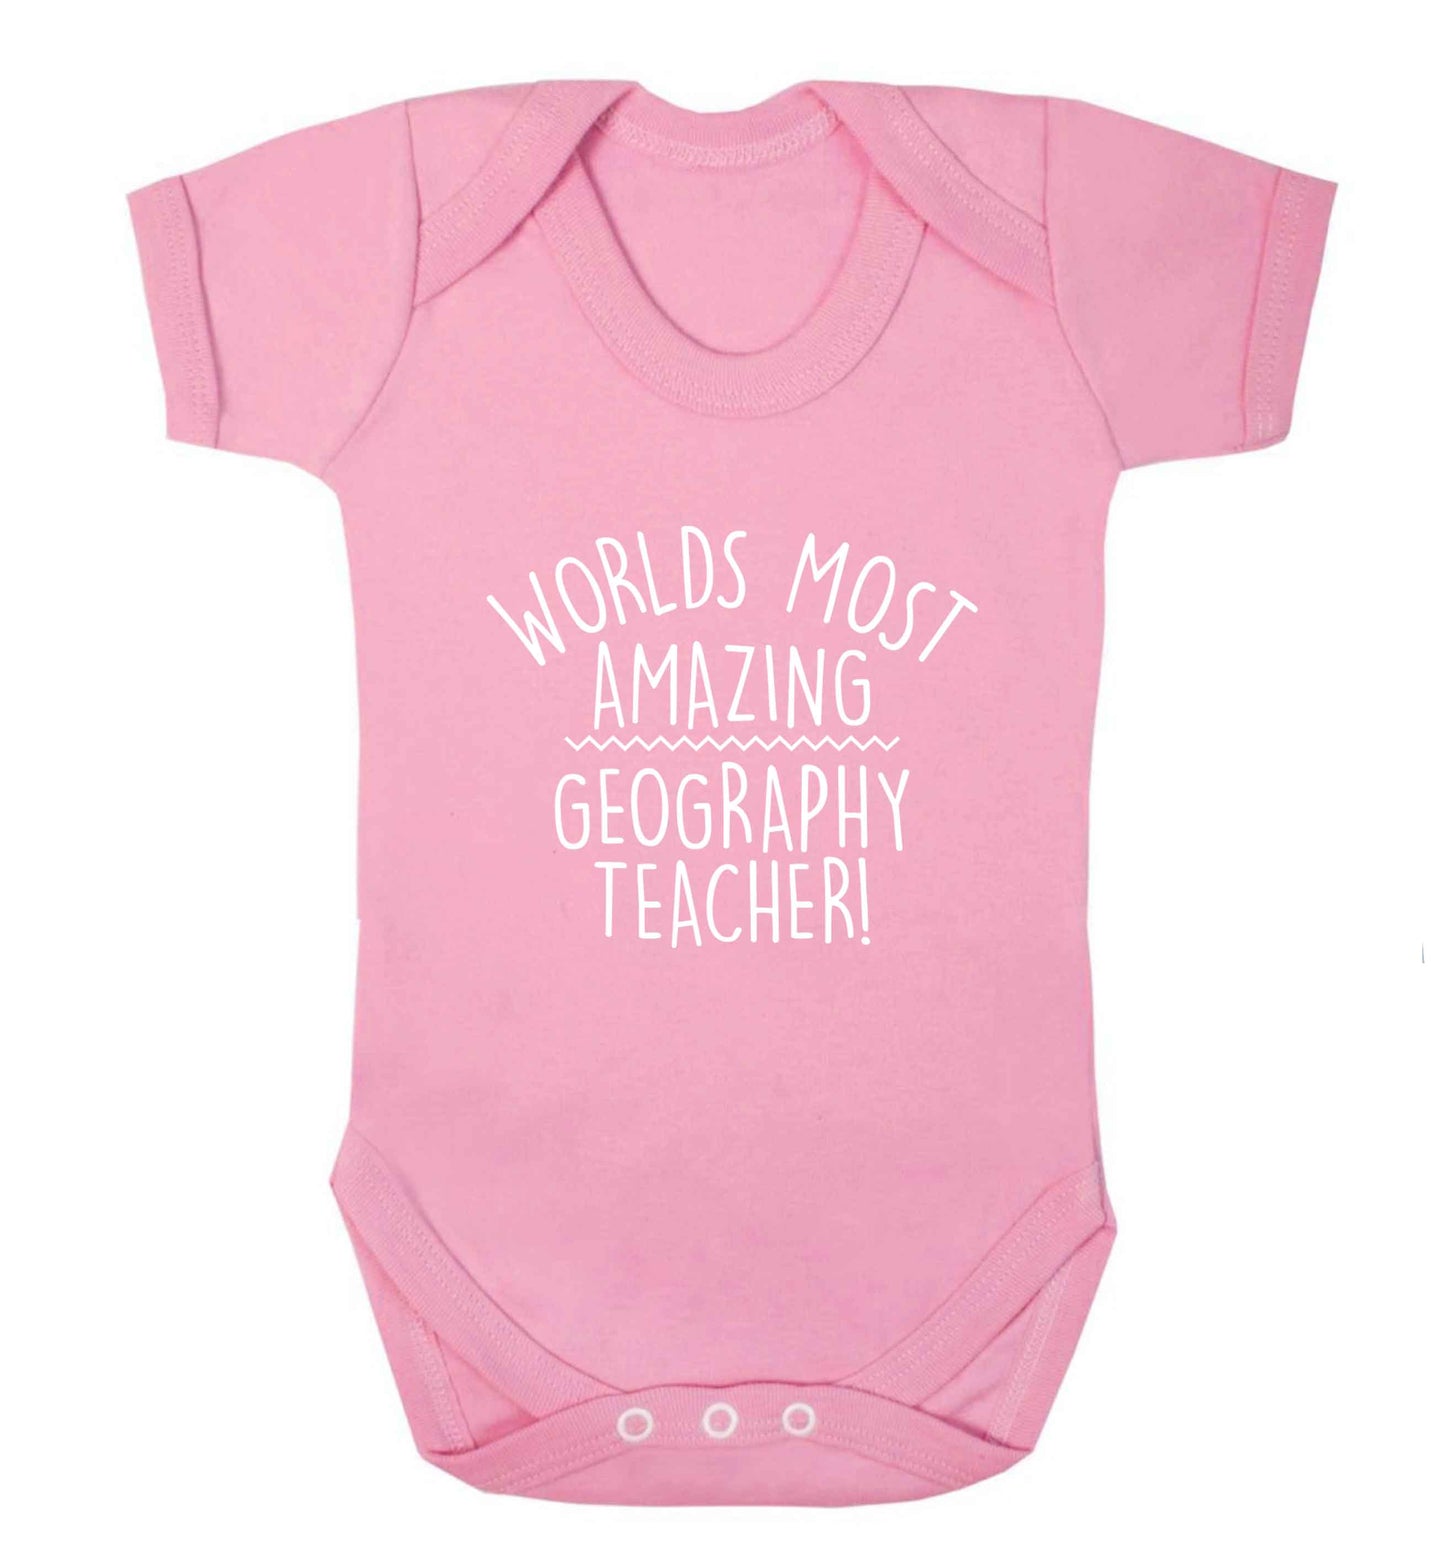 Worlds most amazing geography teacher baby vest pale pink 18-24 months